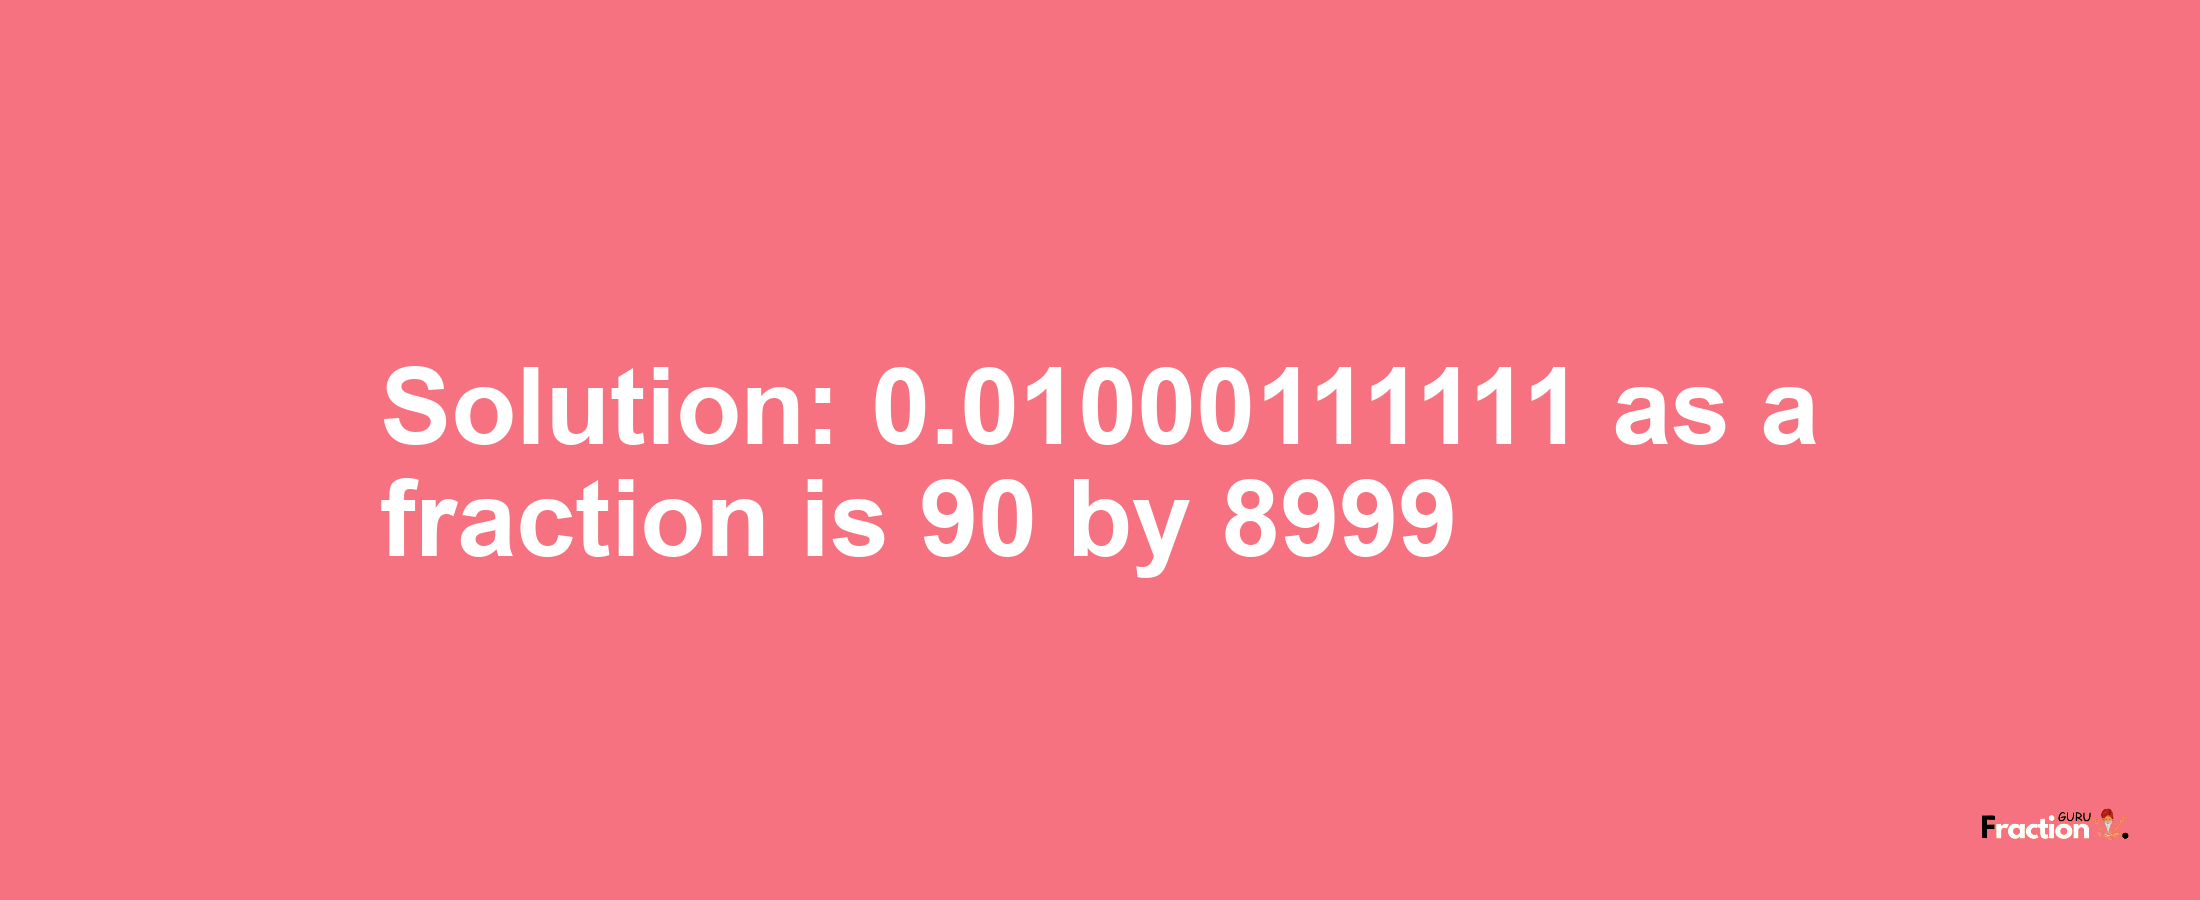 Solution:0.01000111111 as a fraction is 90/8999